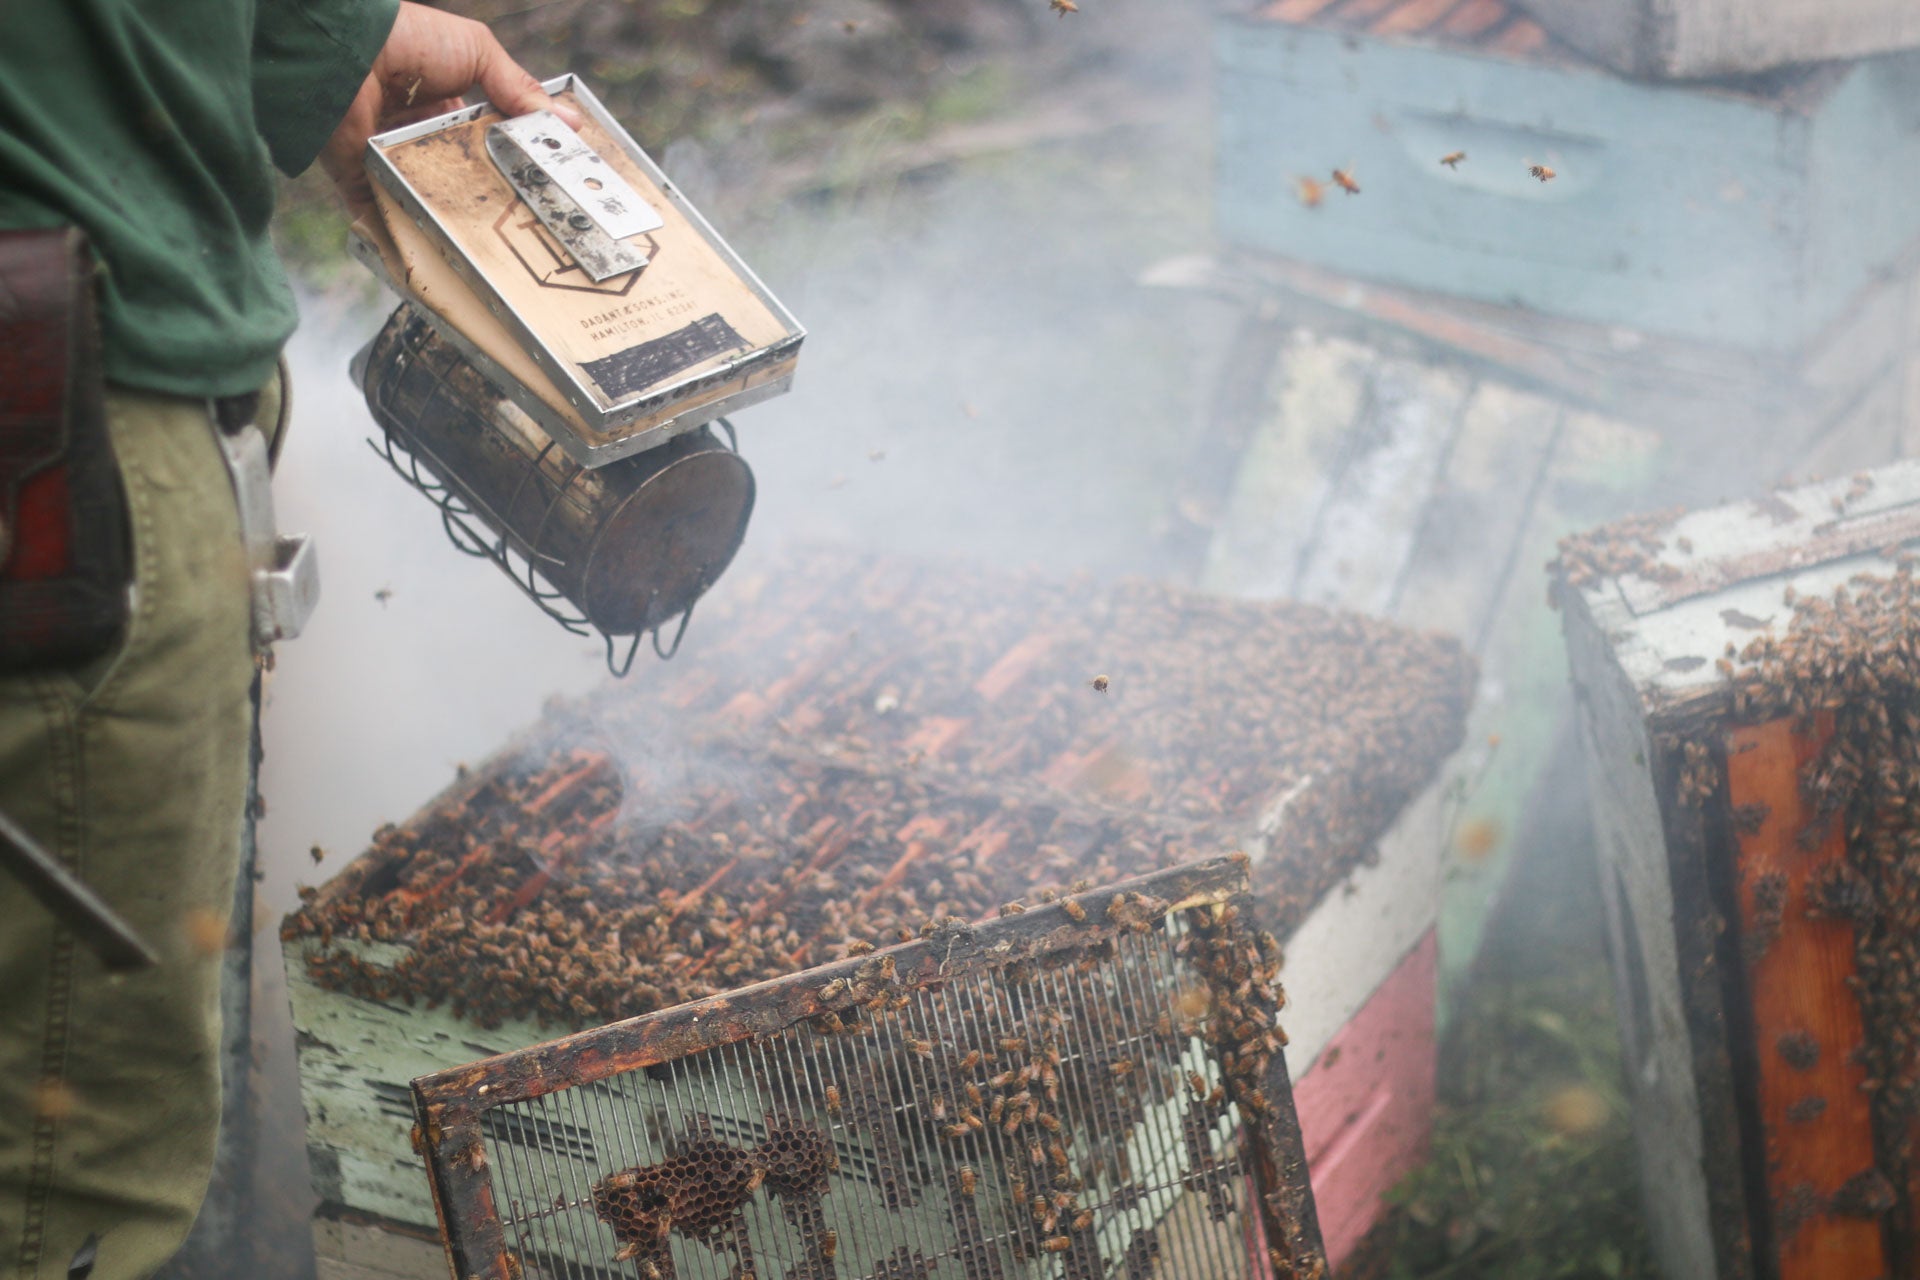 Smoke is used to subdue and remove the bees from the honey comb for honey harvest. PHOTO: Chance Punahele Photography